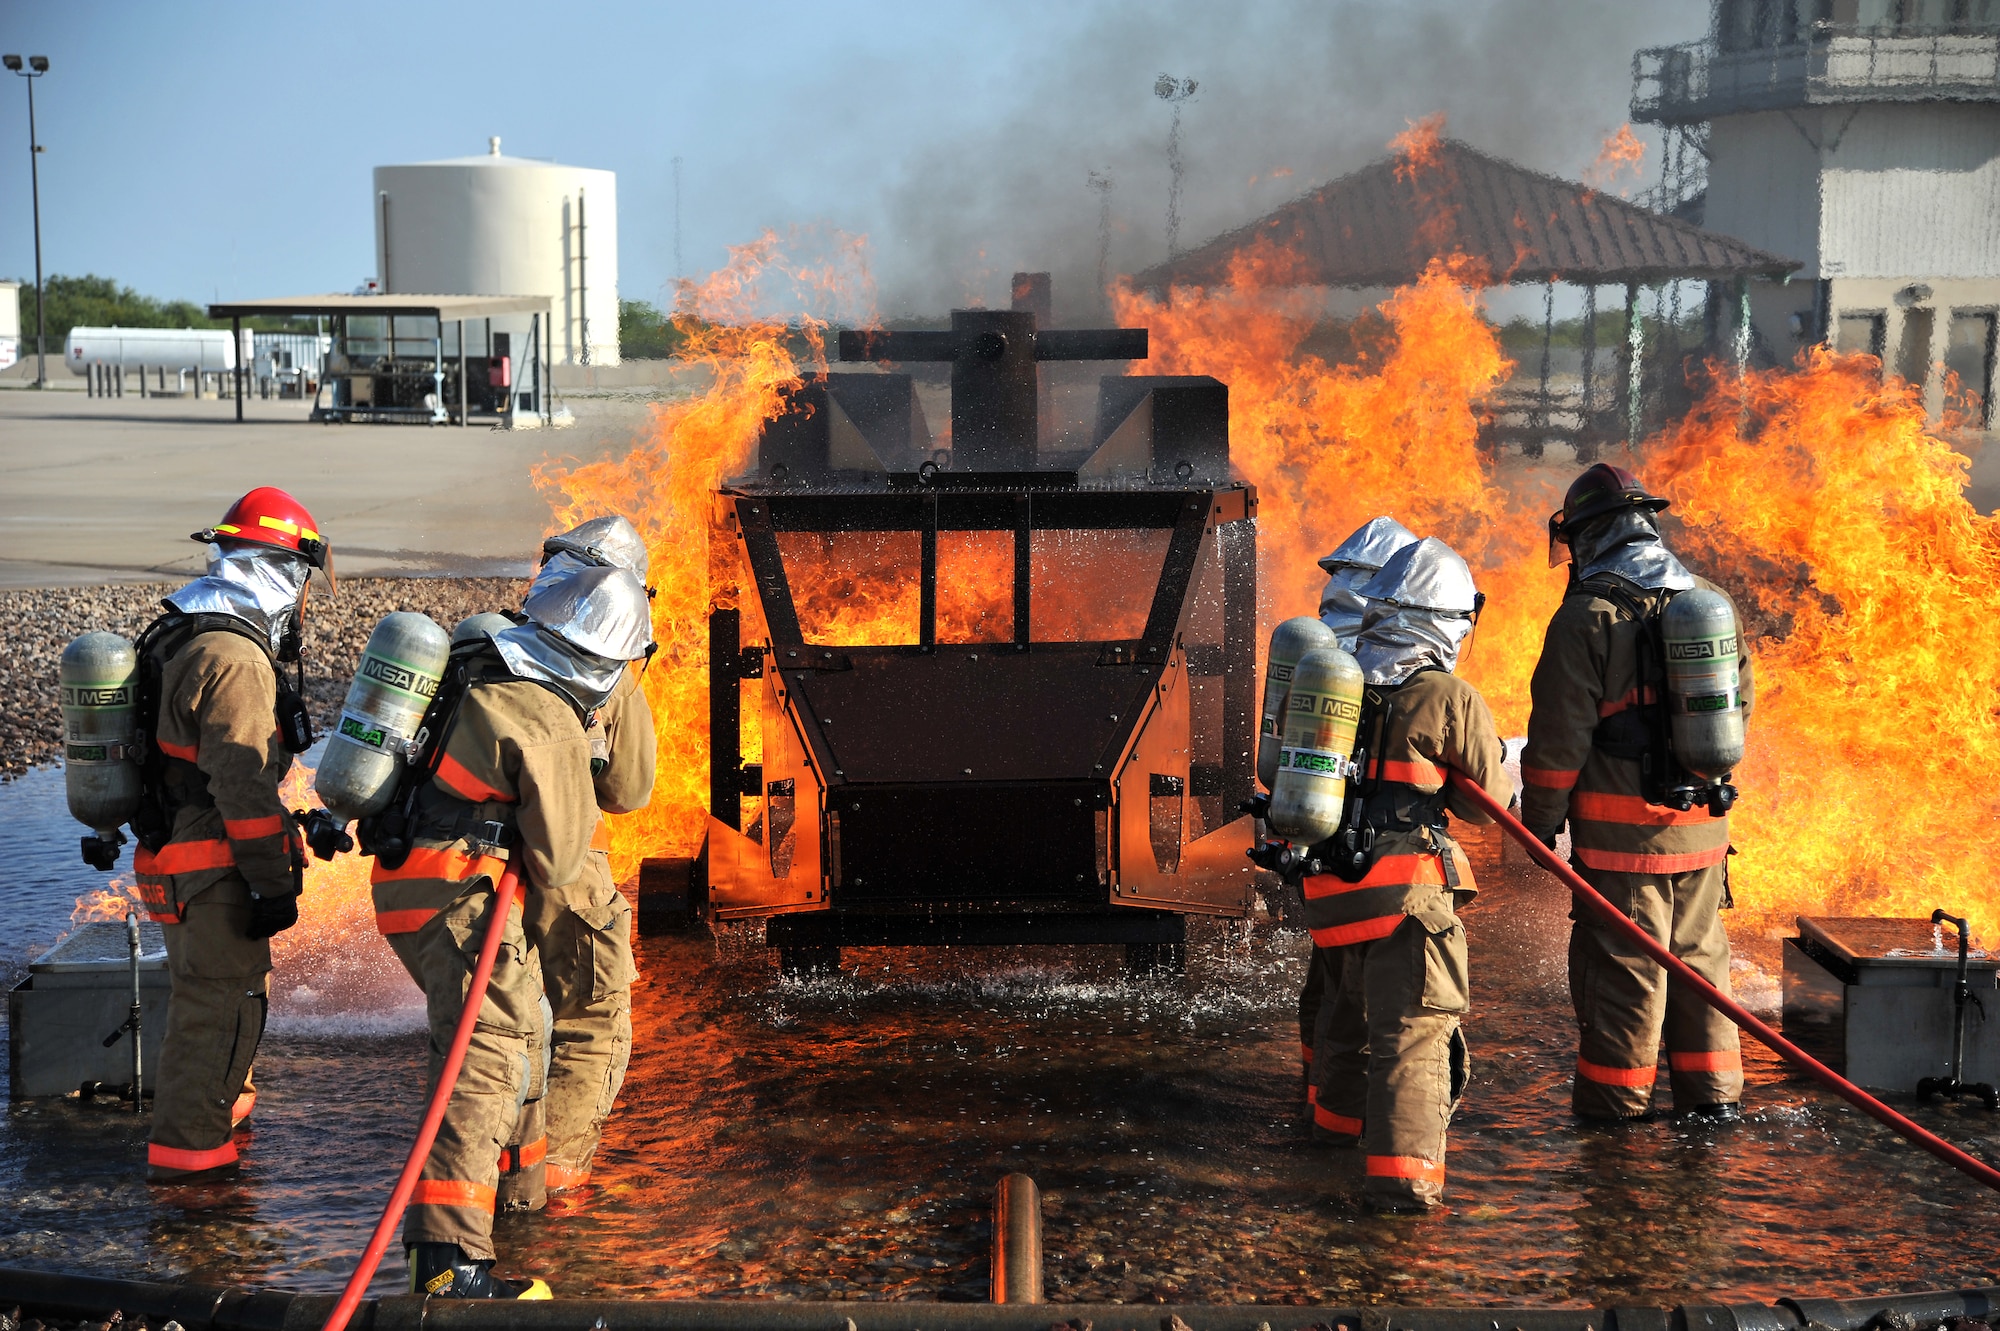 GOODFELLOW AIR FORCE BASE, Texas - Students from the 312th Training Squadron put out a fire in the Helo Trainer at the Louis F. Garland Department of Defense Fire Academy Sept. 6. Instructors watch the students extinguish the fire and help give guidance to insure proper techniques are performed. (U.S. Air Force/ Senior Airman Michael Smith)